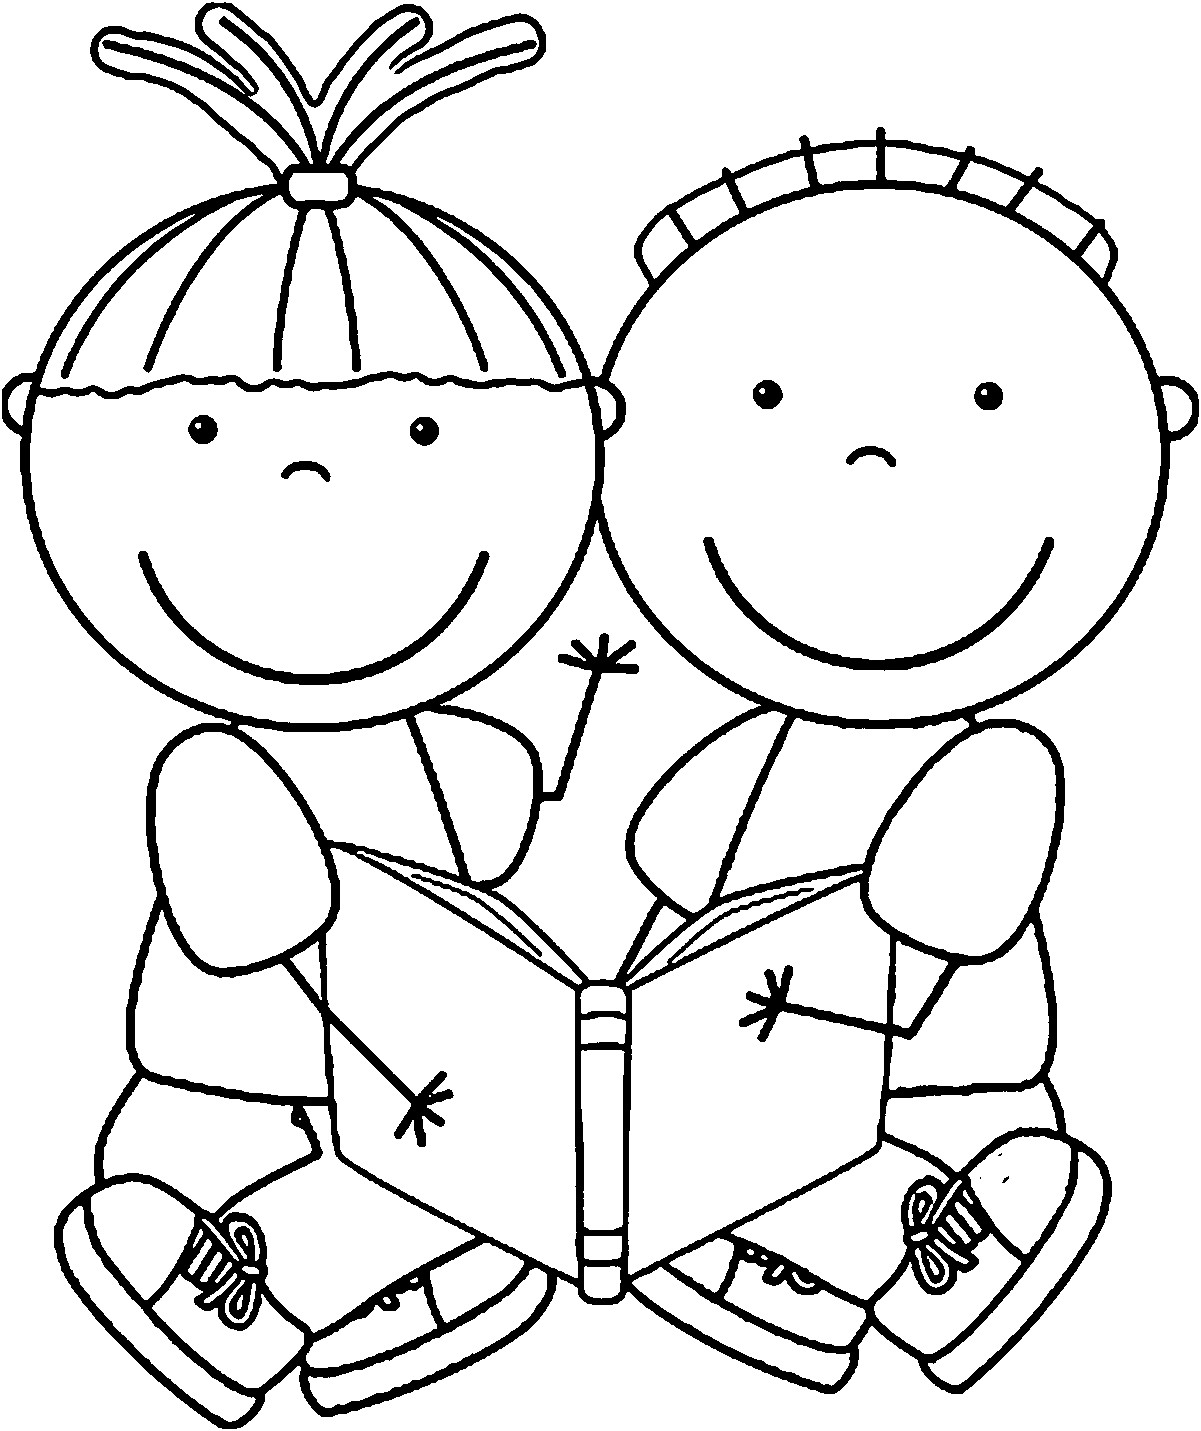 Kids Reading Coloring Pages
 Free Educational Free Children Reading Books Kids Coloring